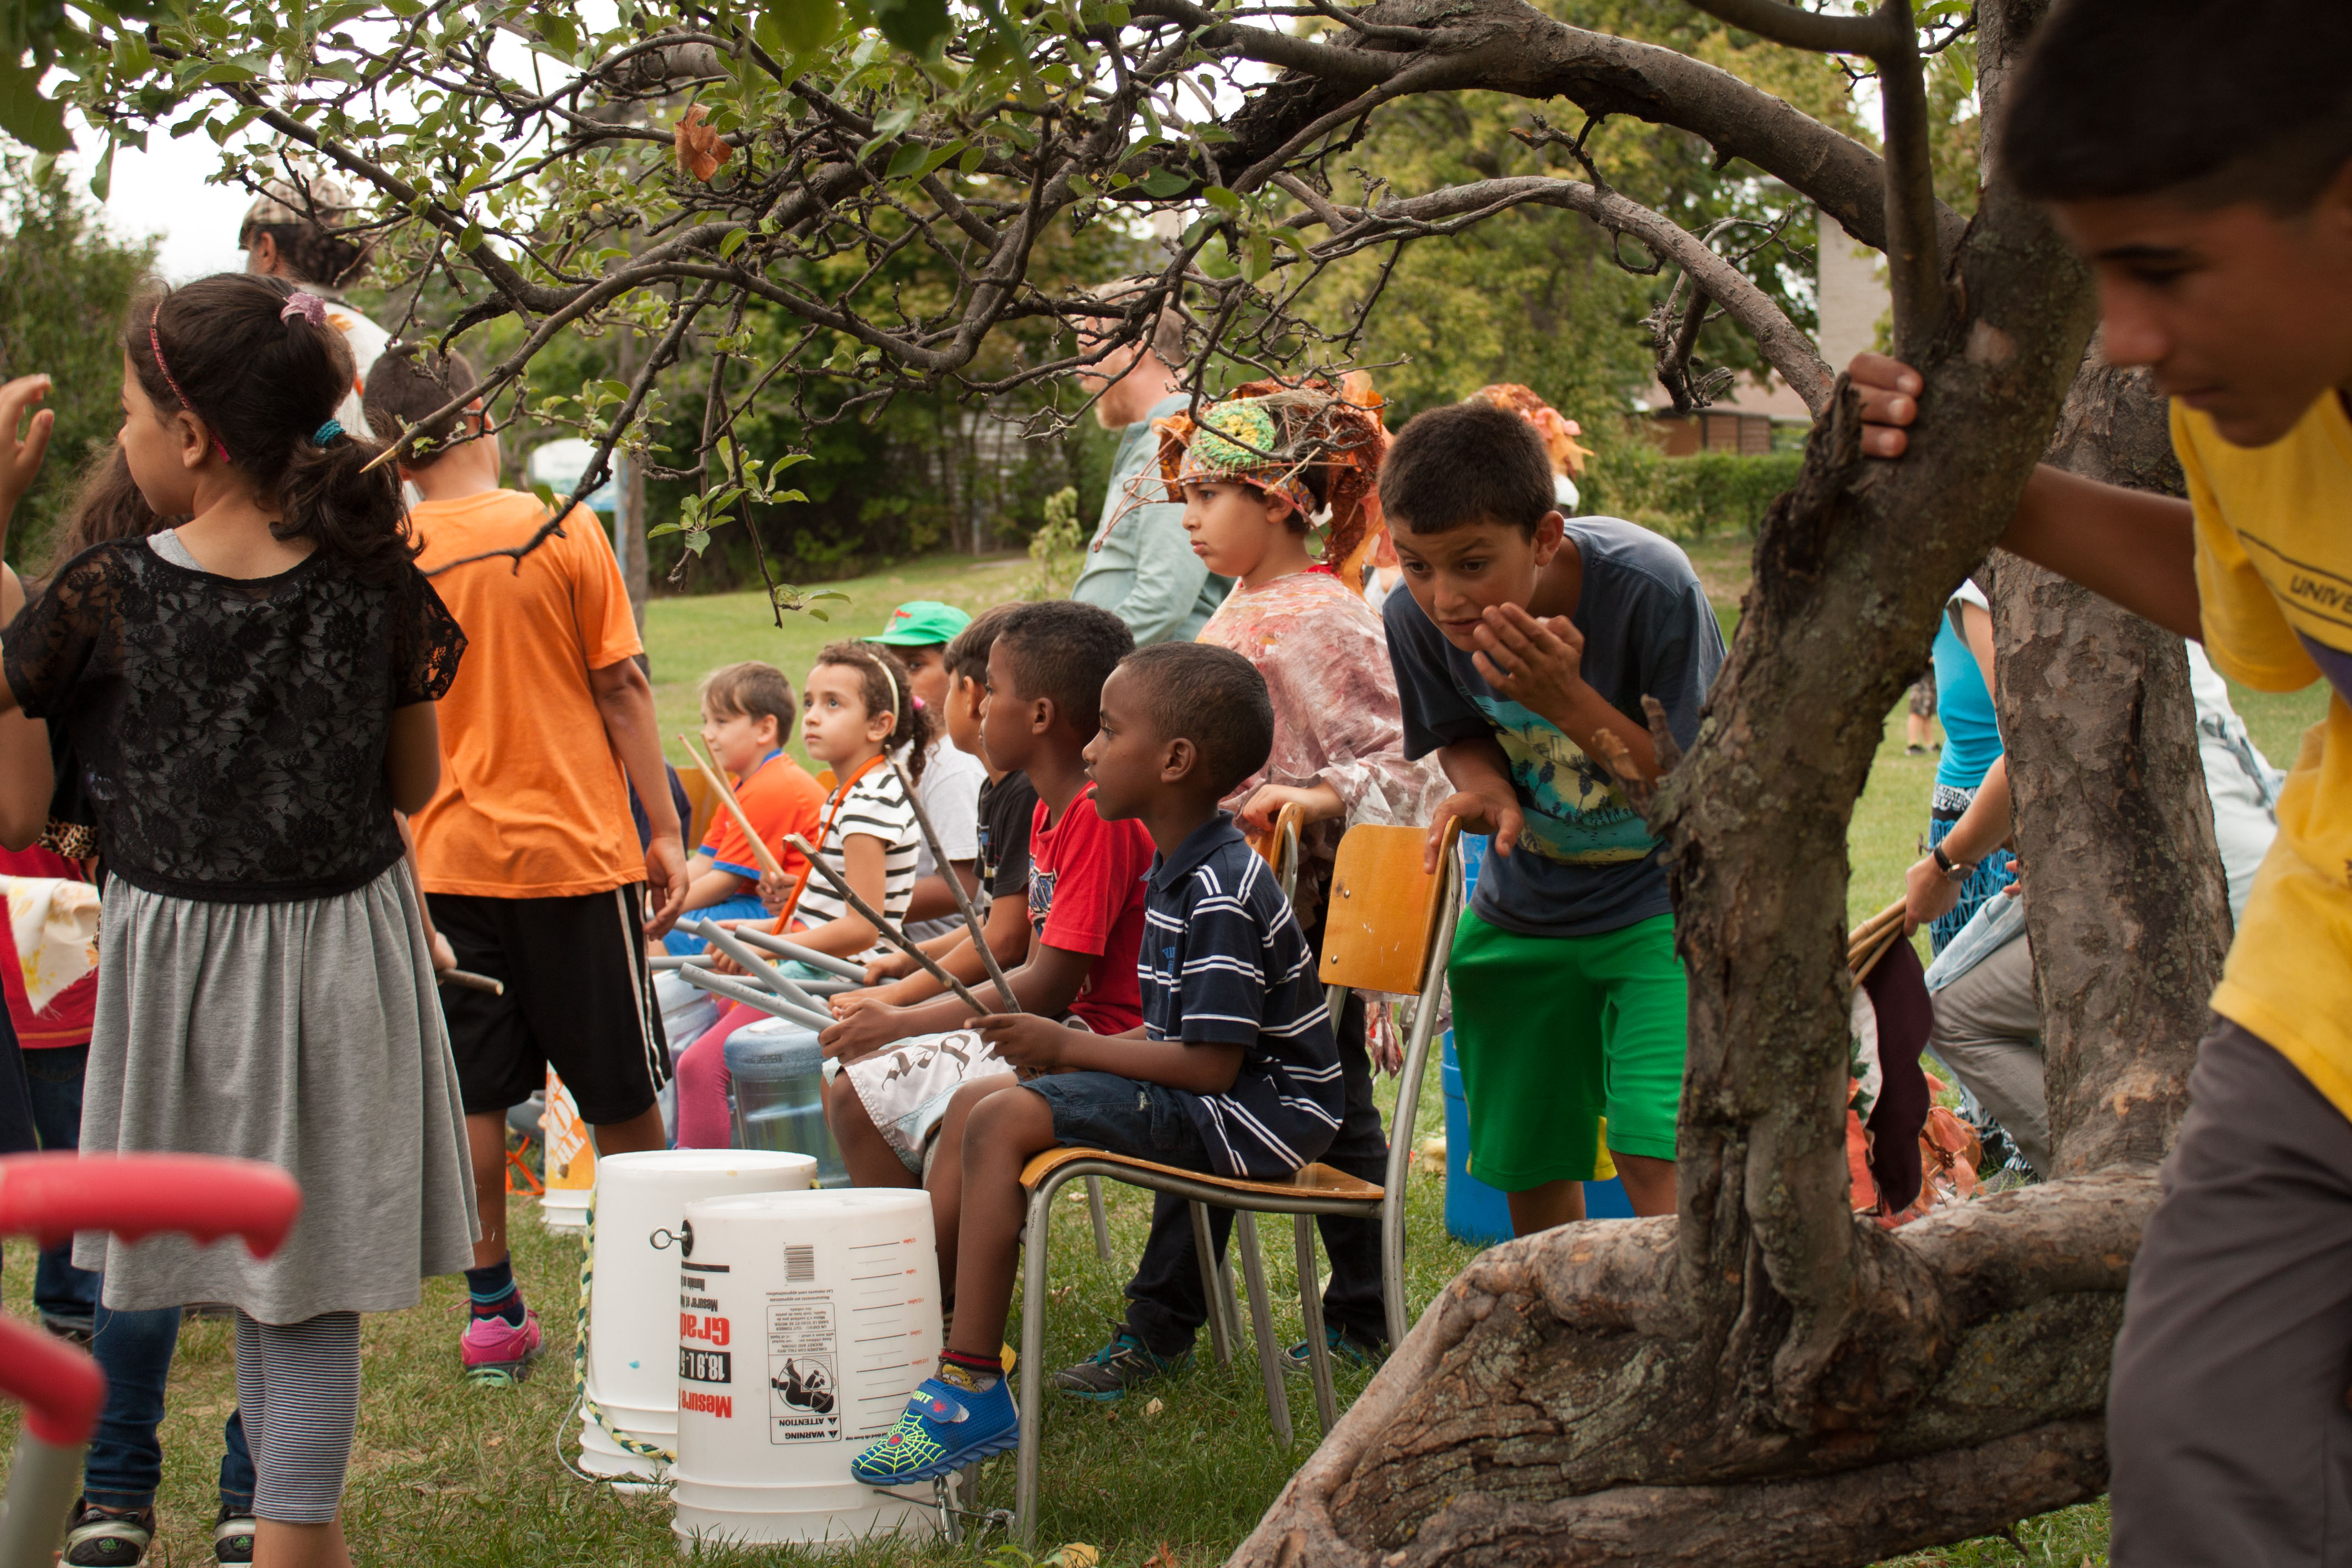 A group of children play buckets as drums under a tree.